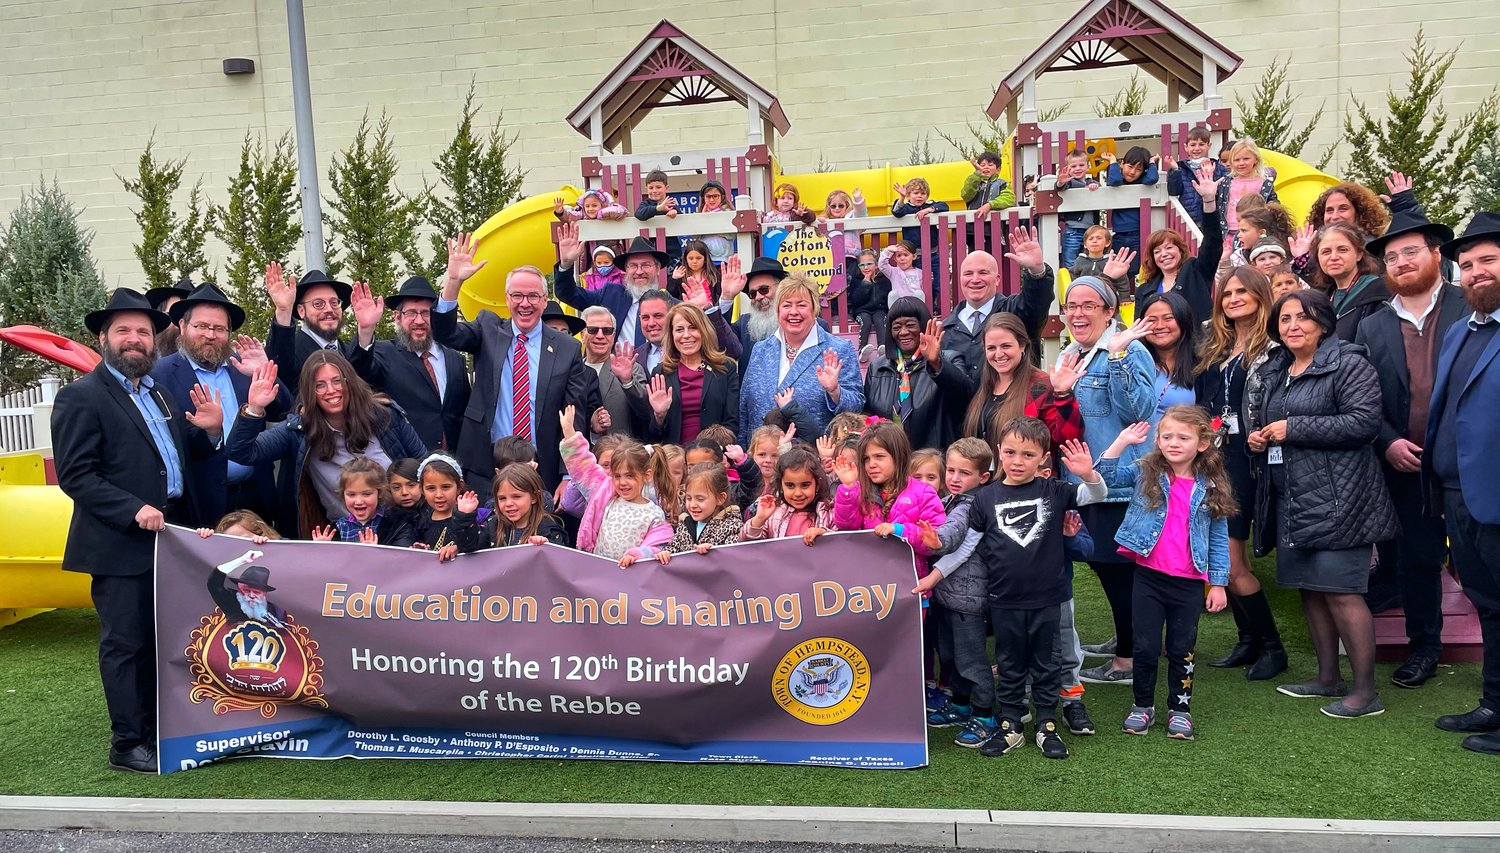 It was a community affair in Merrick last week when Town of Hempstead officials and Chabad rabbis from across Nassau County gathered to honor Rabbi Menachem Mendel Schneerson on what would have been his 120th birthday.